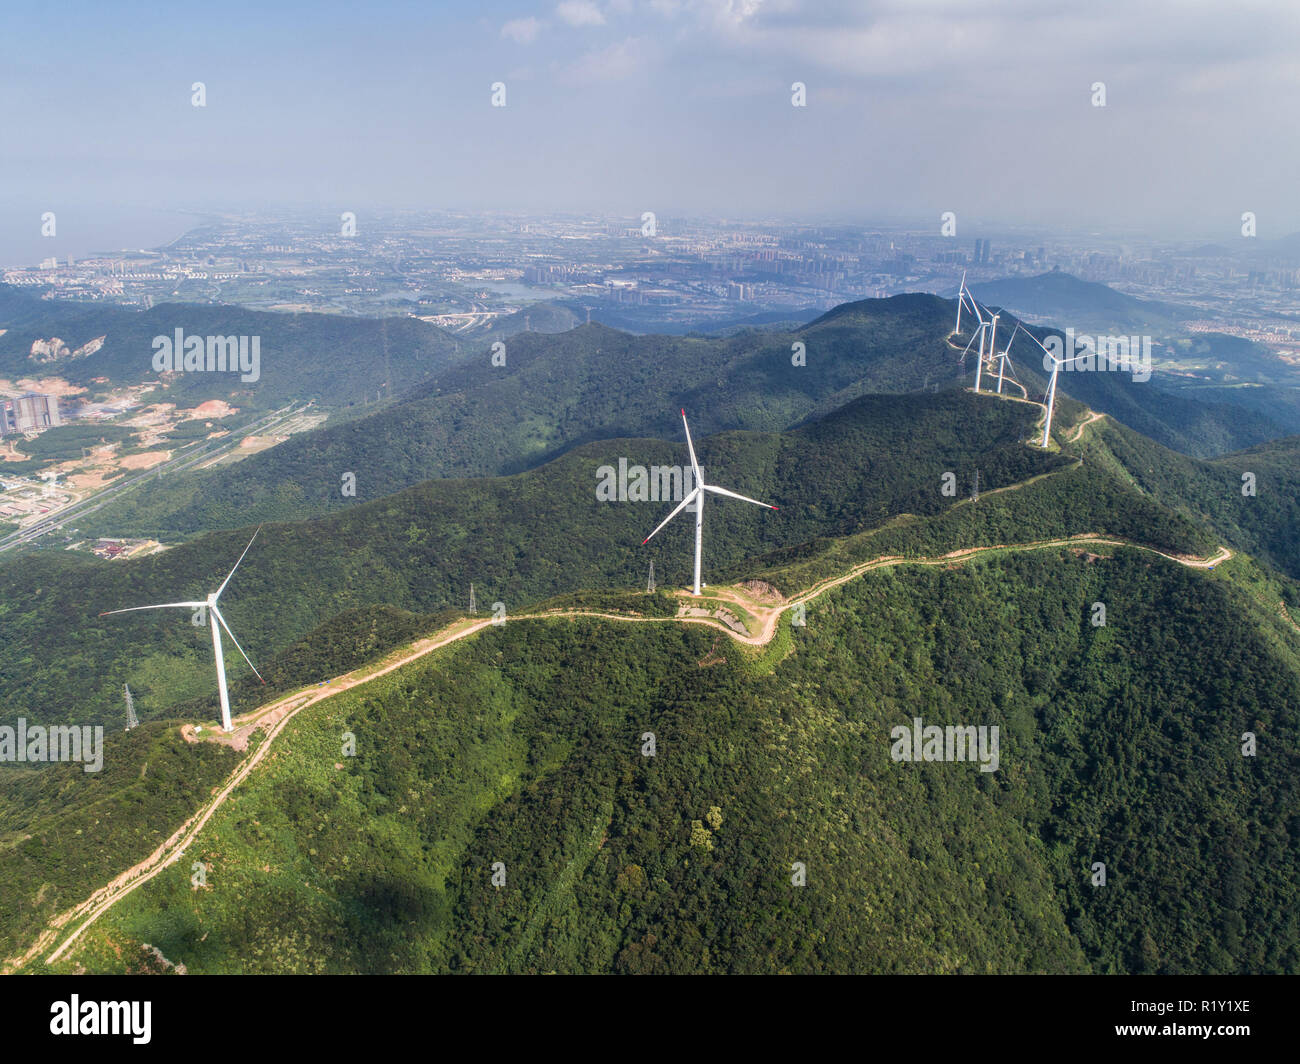 (181115) -- BEIJING, Nov. 15, 2018 (Xinhua) -- Aerial photo taken on Aug. 23, 2018 shows the Bianshan wind farm in Changxing County, east China's Zhejiang Province. According to the National Bureau of Statistics, China's power generation rose 7.2 percent year-on-year in the first 10 months of 2018. In October alone, China generated 533 billion kilowatt-hours (kWh) of power, up 4.8 percent year on year, faster than the 4.6-percent growth in September. The average daily power generation reached 17.2 billion kWh, edging down from 18.3 billion kWh in September. China saw a faster growth rate of hy Stock Photo